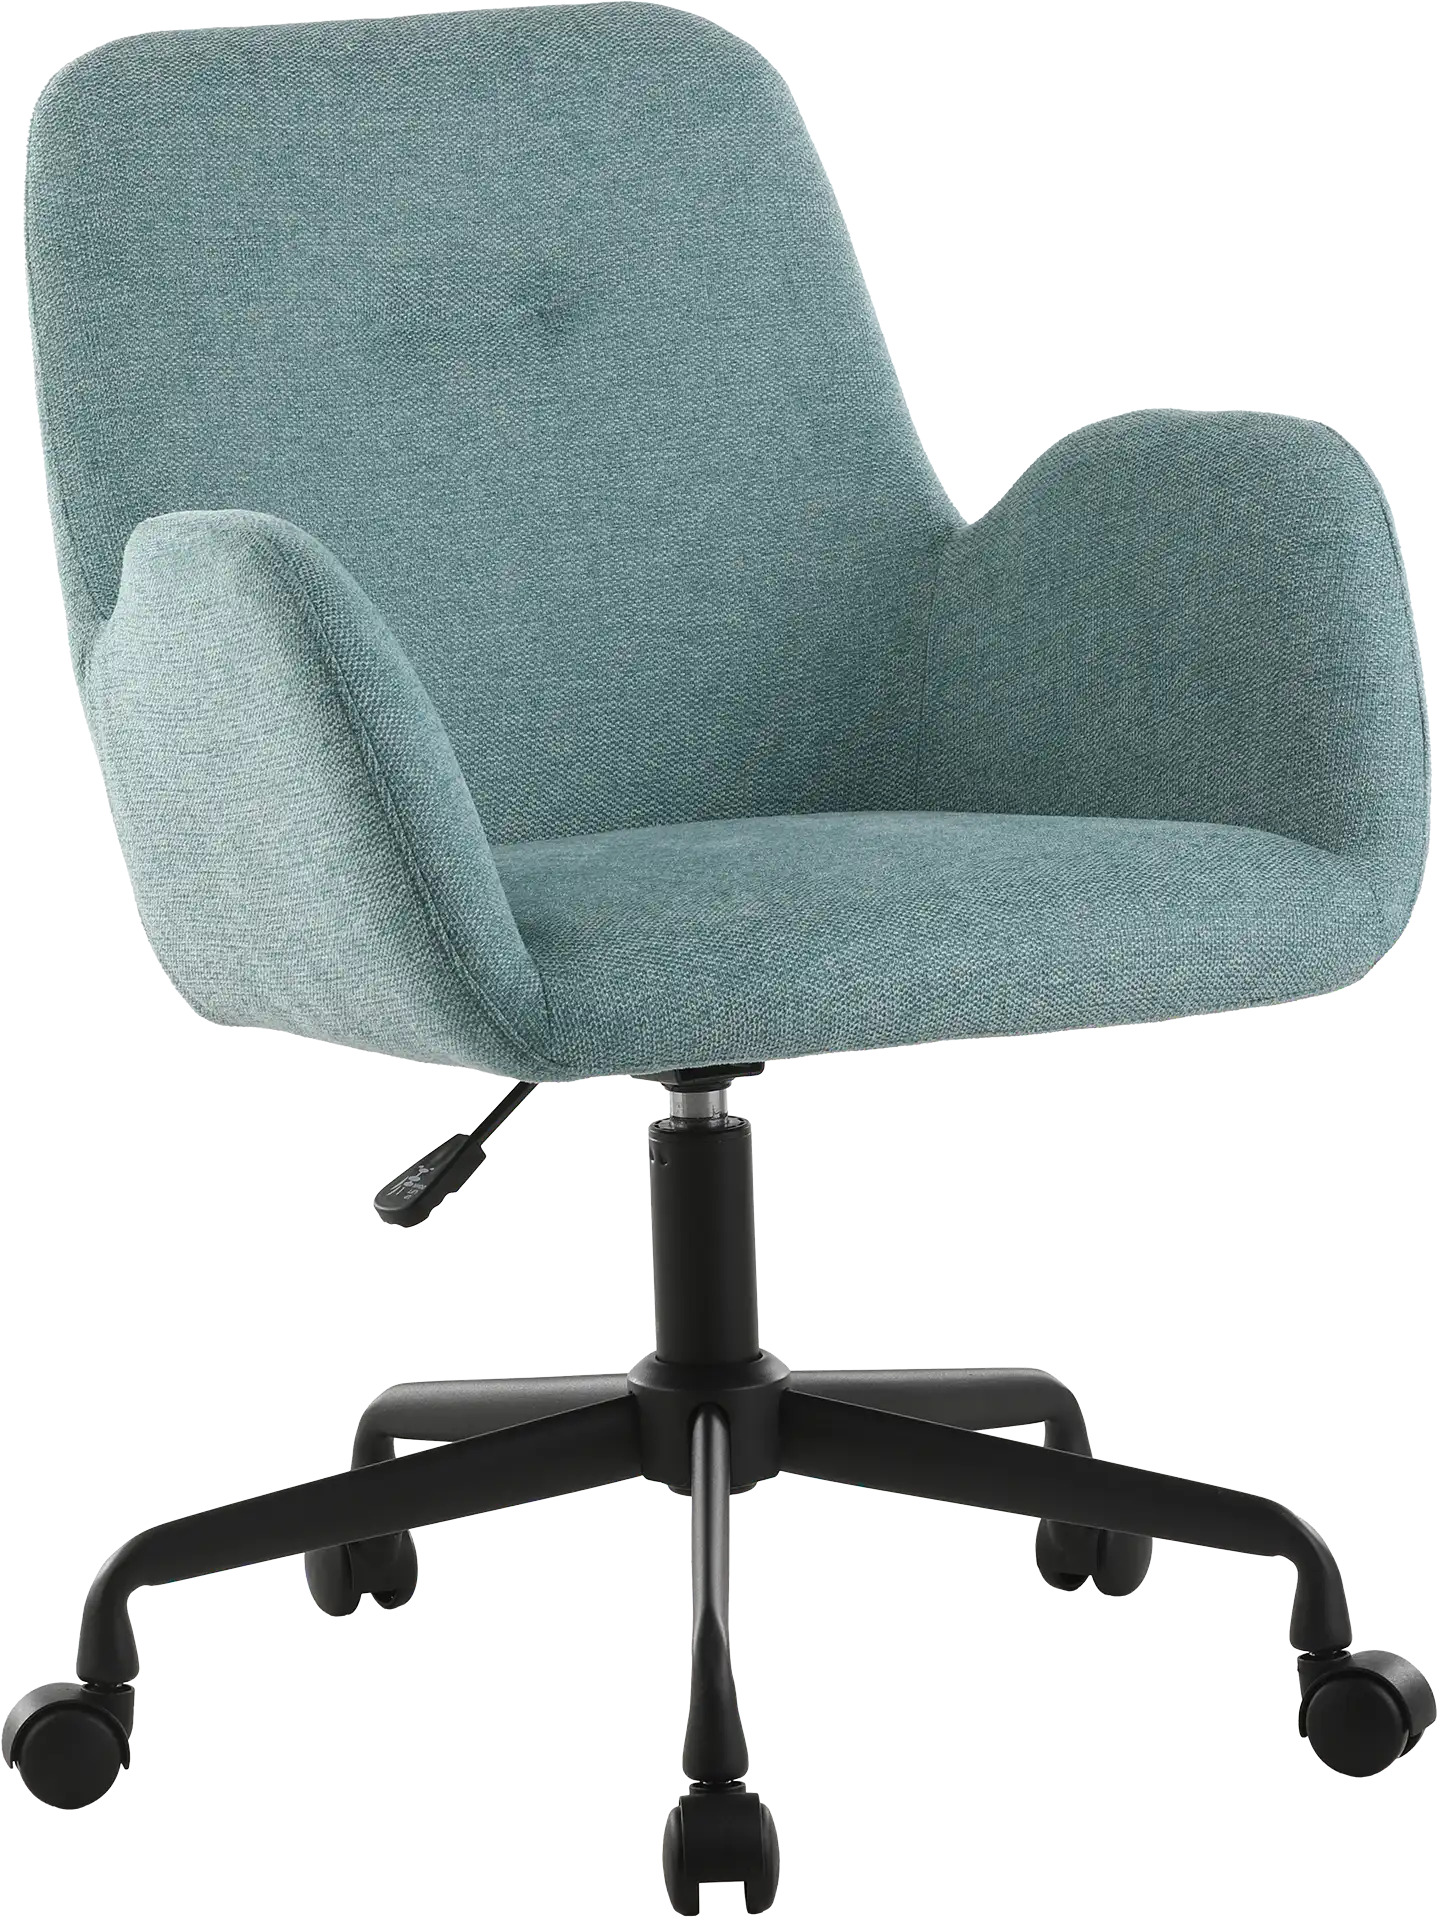 FAUTEUIL TISSU SHINEO TURQUOISE ROULETTES